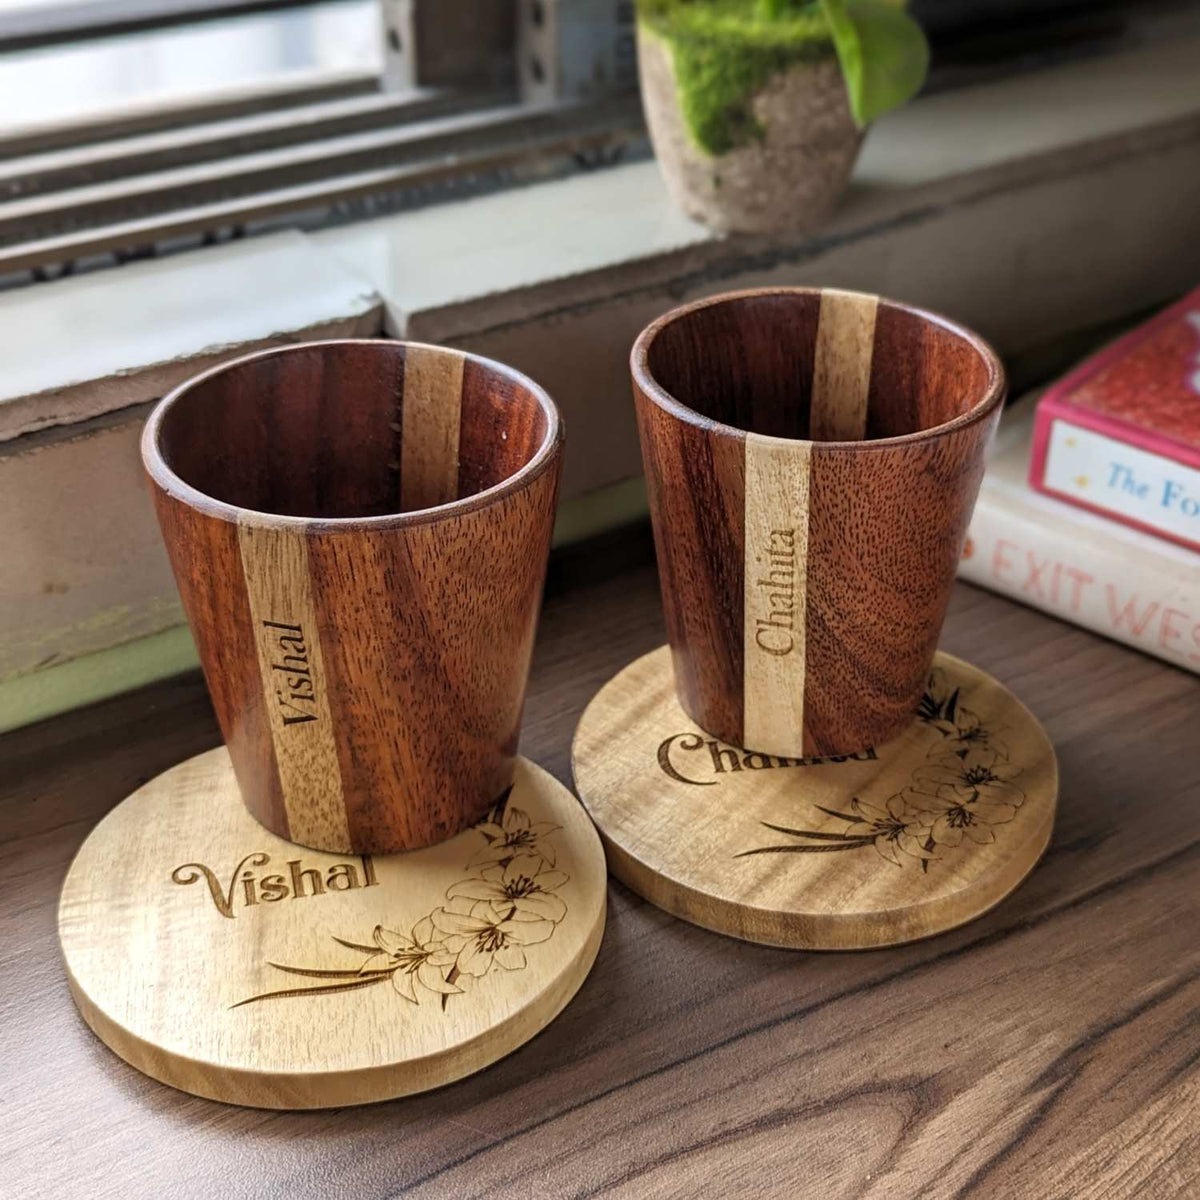 A personalized gift set with 2 name engraved wooden tea cups, a personalized tea tray with your custom engraved message and 2 wooden coasters with names or a logo engraved. #woodgeek #woodgeekstore #anniversarygifts #happyanniversary #giftforpartner #giftforlove #giftsetideas